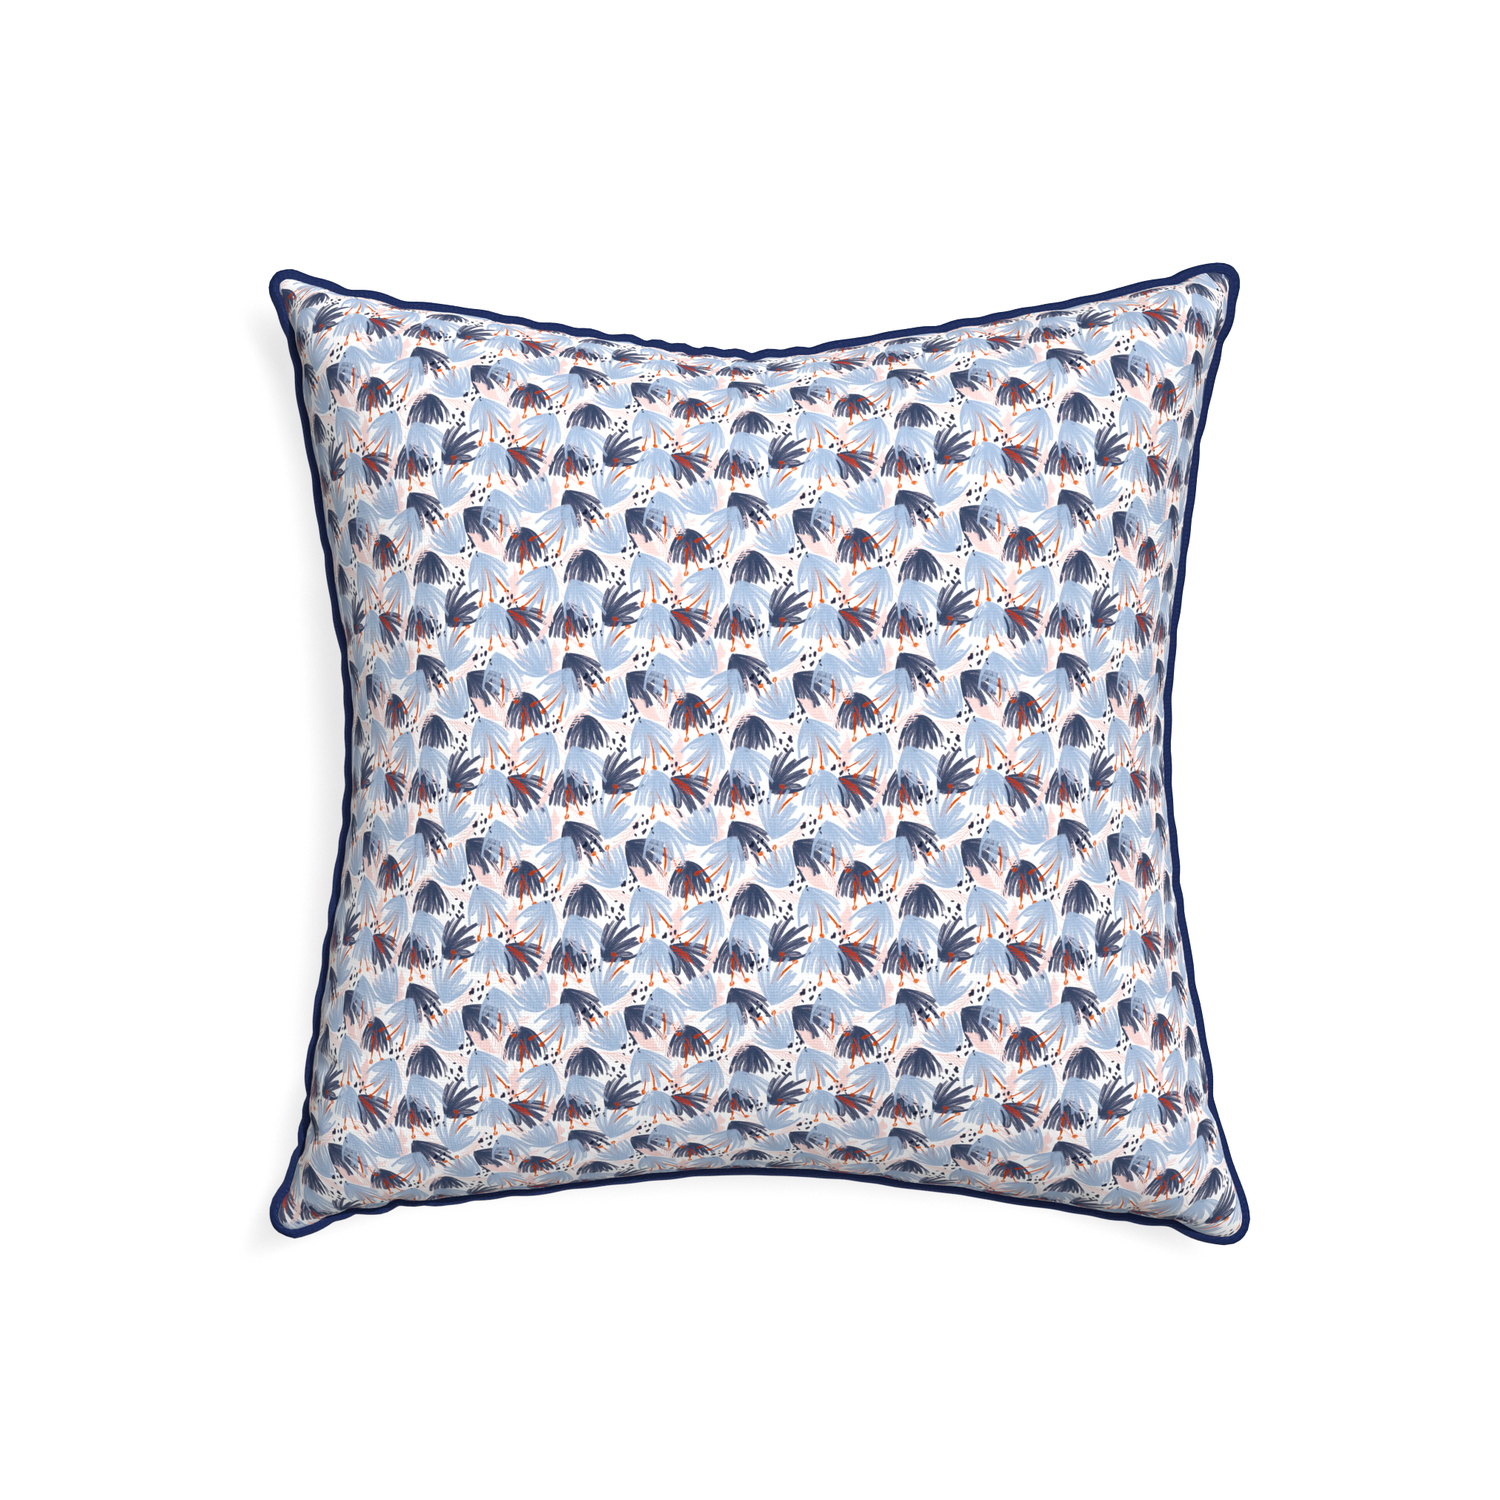 22-square eden blue custom pillow with midnight piping on white background